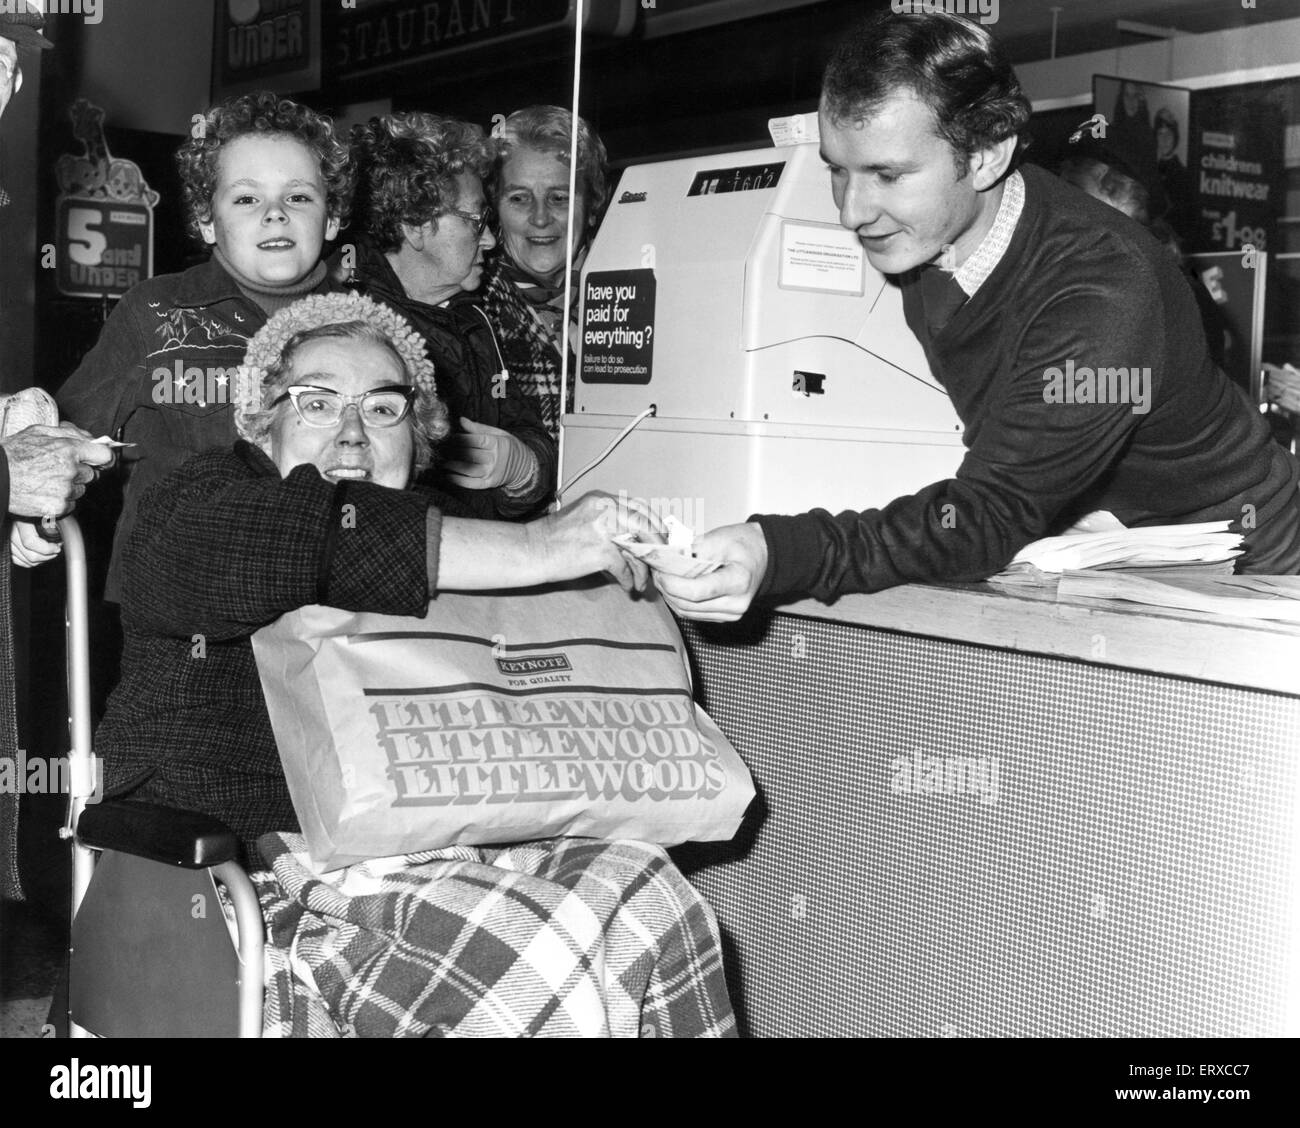 Gladys Davies, 73 from Wallasey, guided by her 10 year old grandson Michael, completes her Christmas Shopping after hours, as shops in Wallasey stayed open late exclusively for the disabled, handicapped and elderly, 6th December 1977. Stock Photo